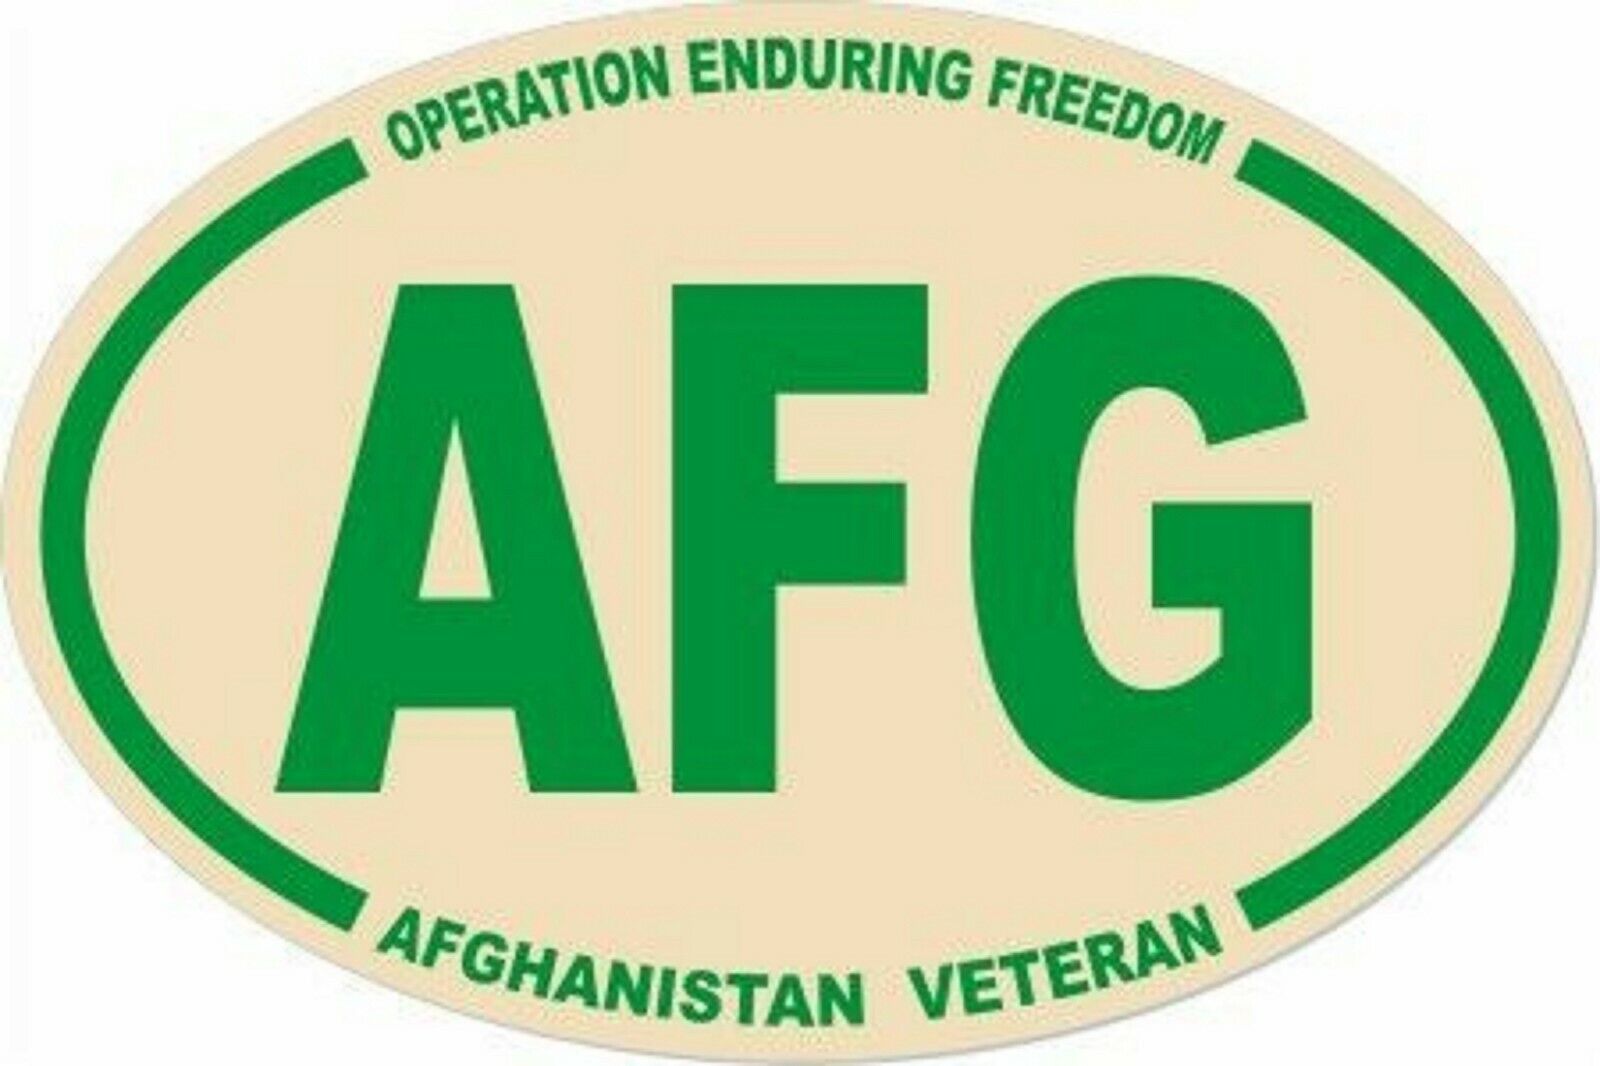 3 X 4.5 UNITED STATES MILITARY  AFG AFGHANISTAN VET OVAL EURO STICKER